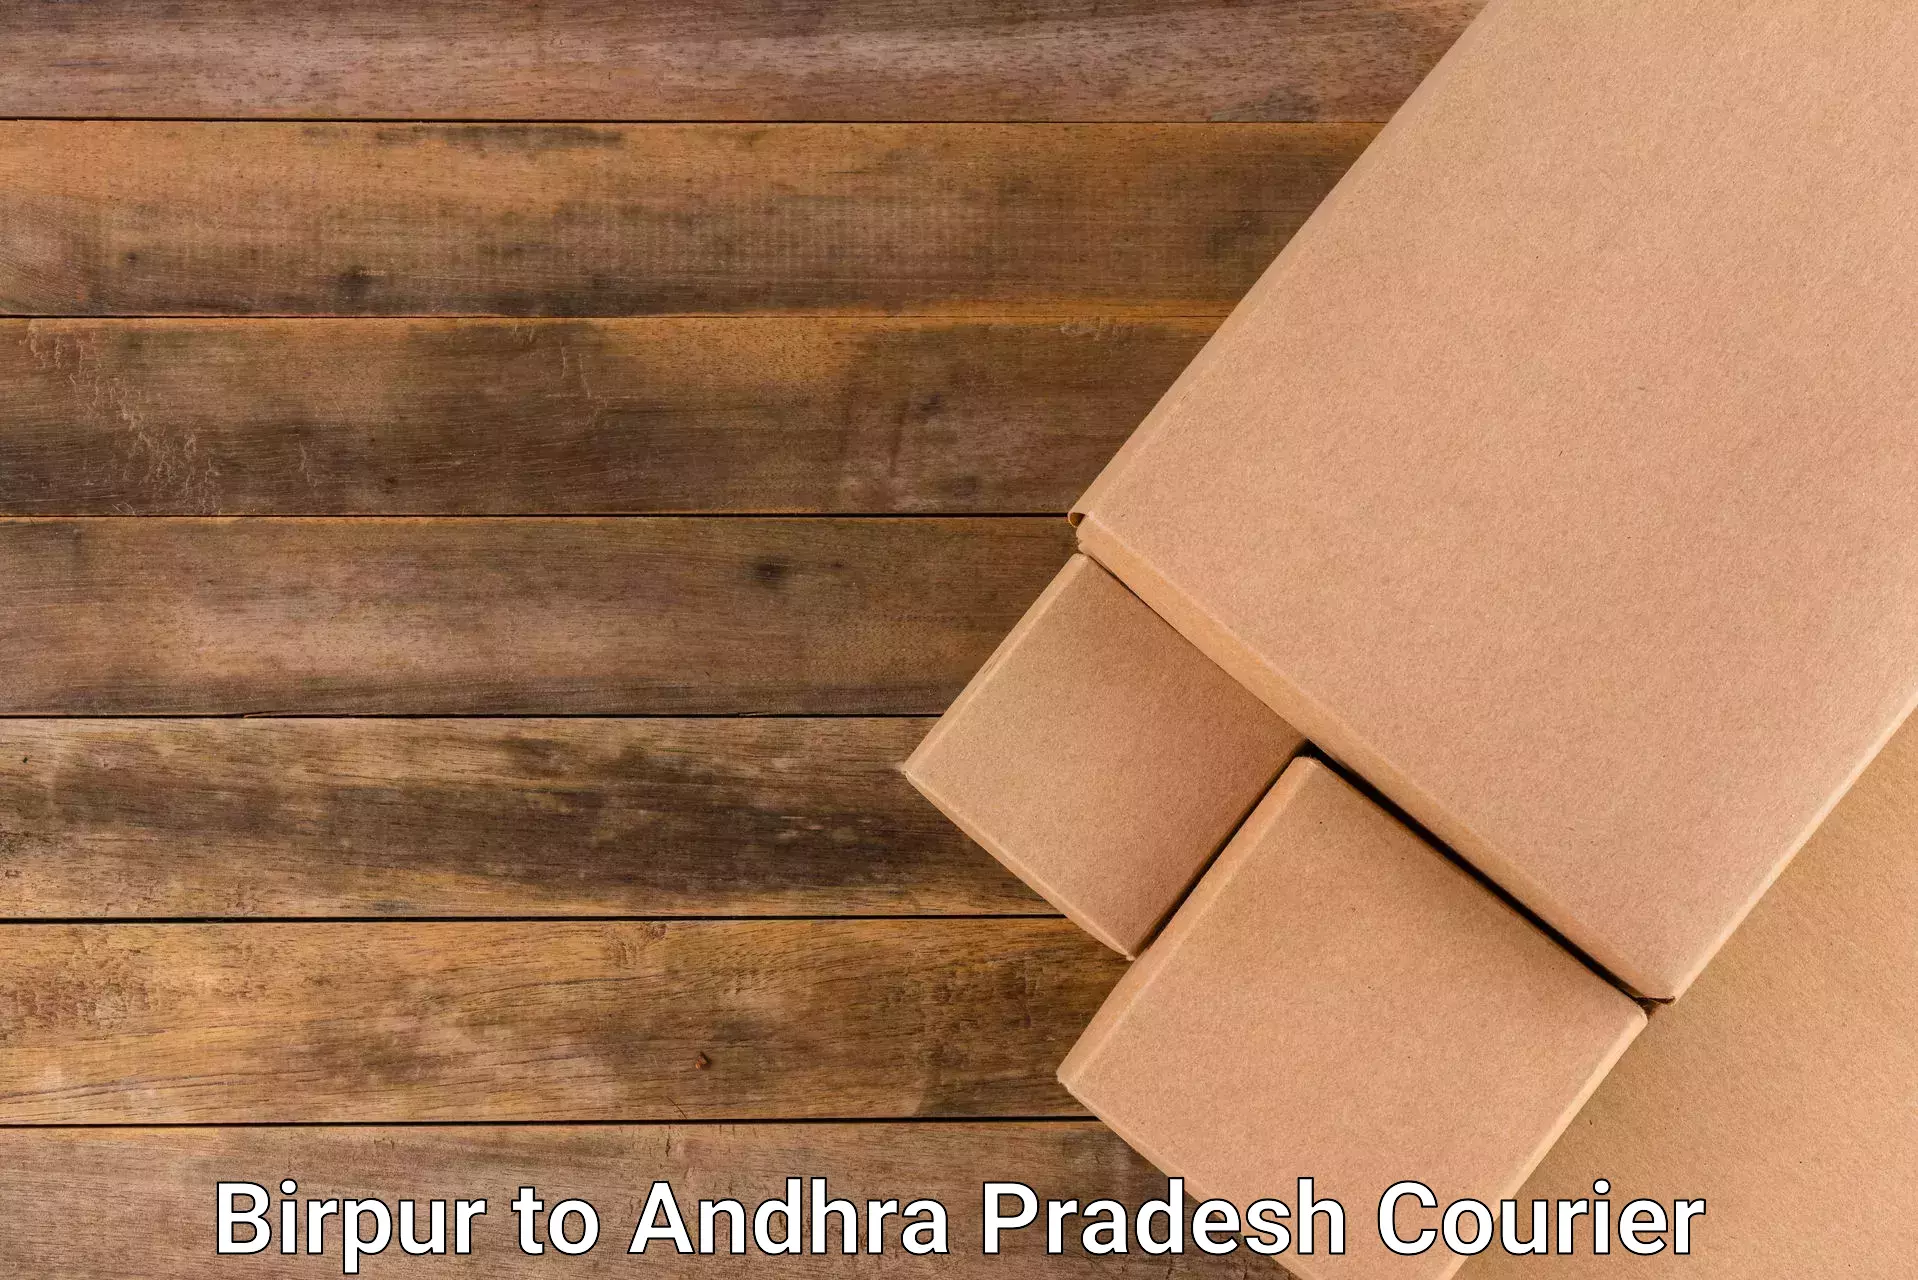 Reliable courier services Birpur to Andhra Pradesh